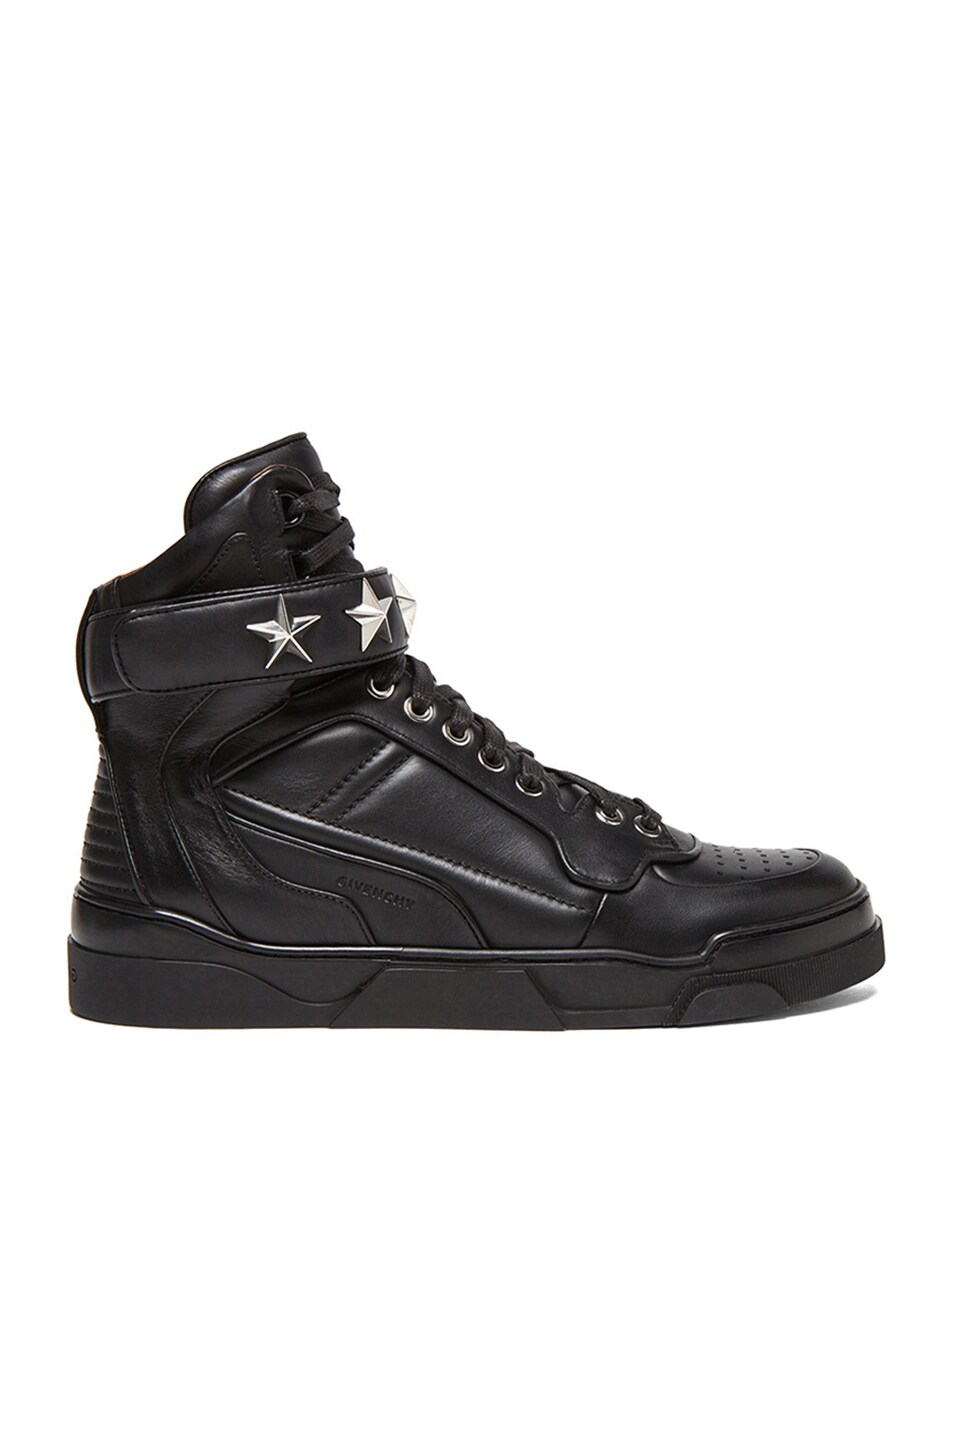 GIVENCHY Tyson High Top Leather Sneakers